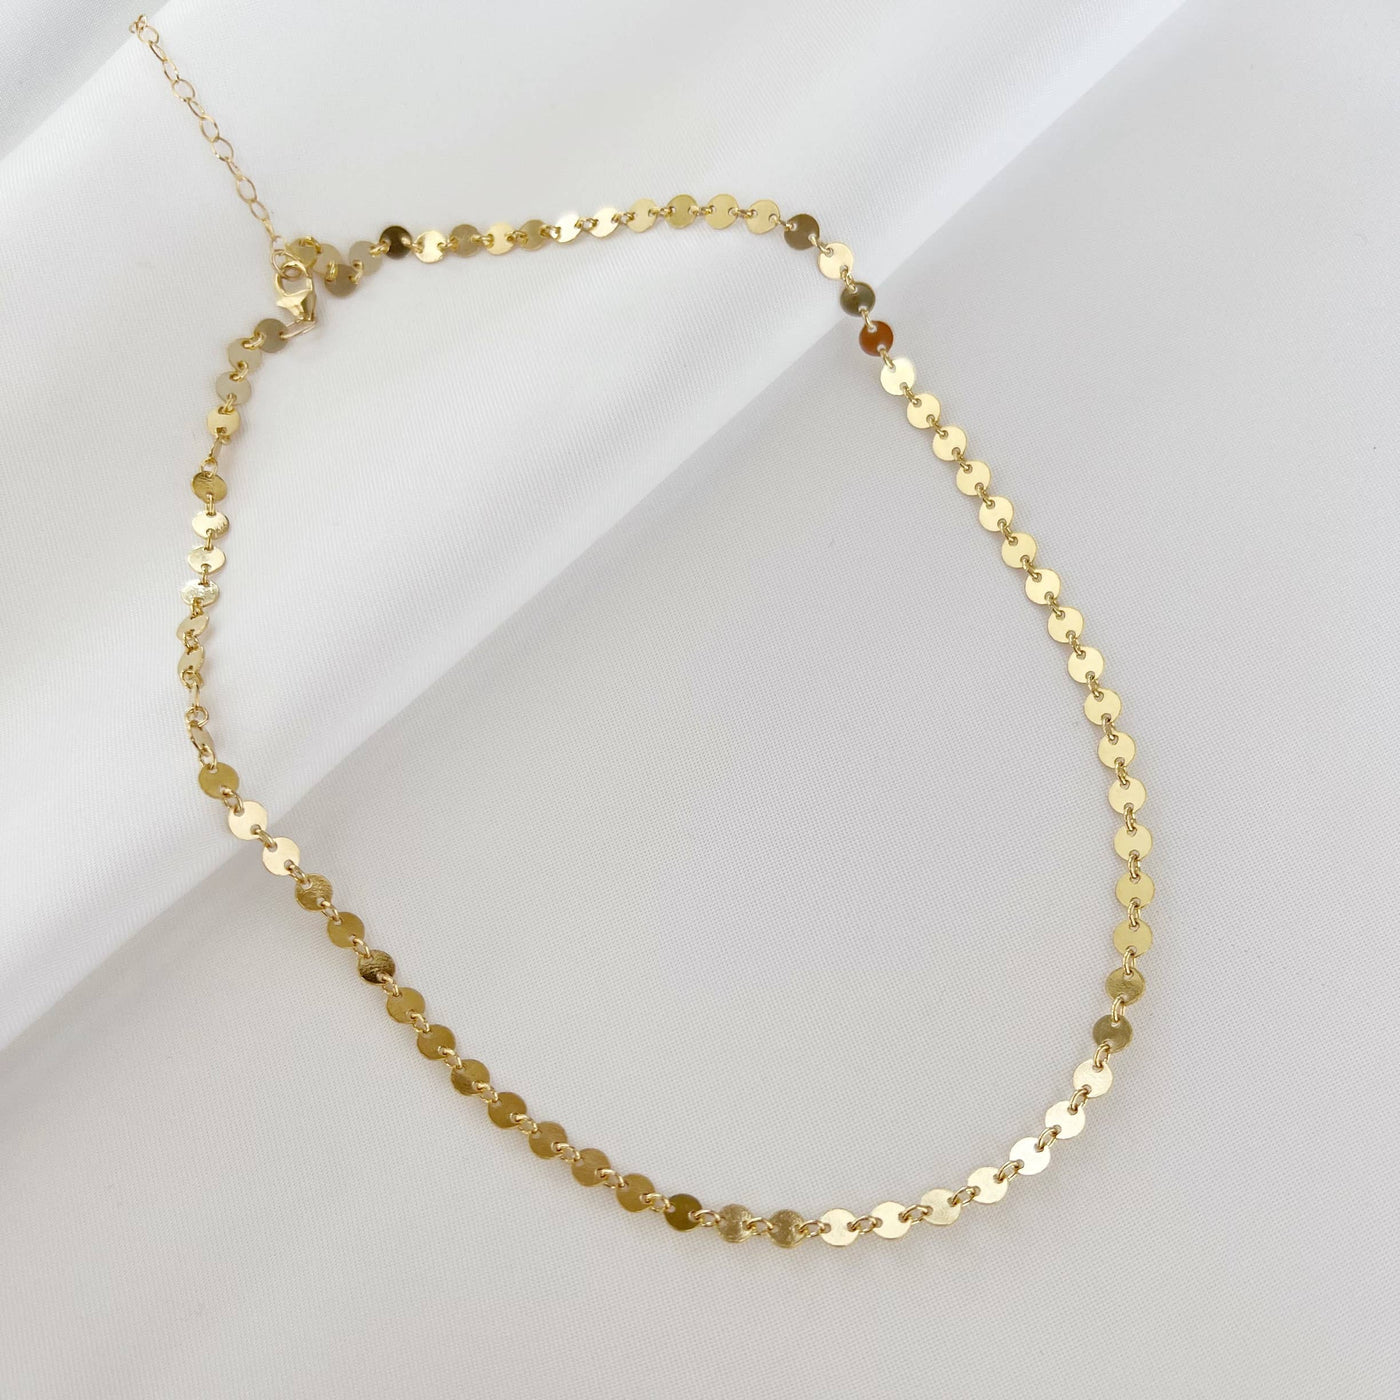 true by kristy jewelry - Luxe Sequin Disc Chain Necklace Gold Filled